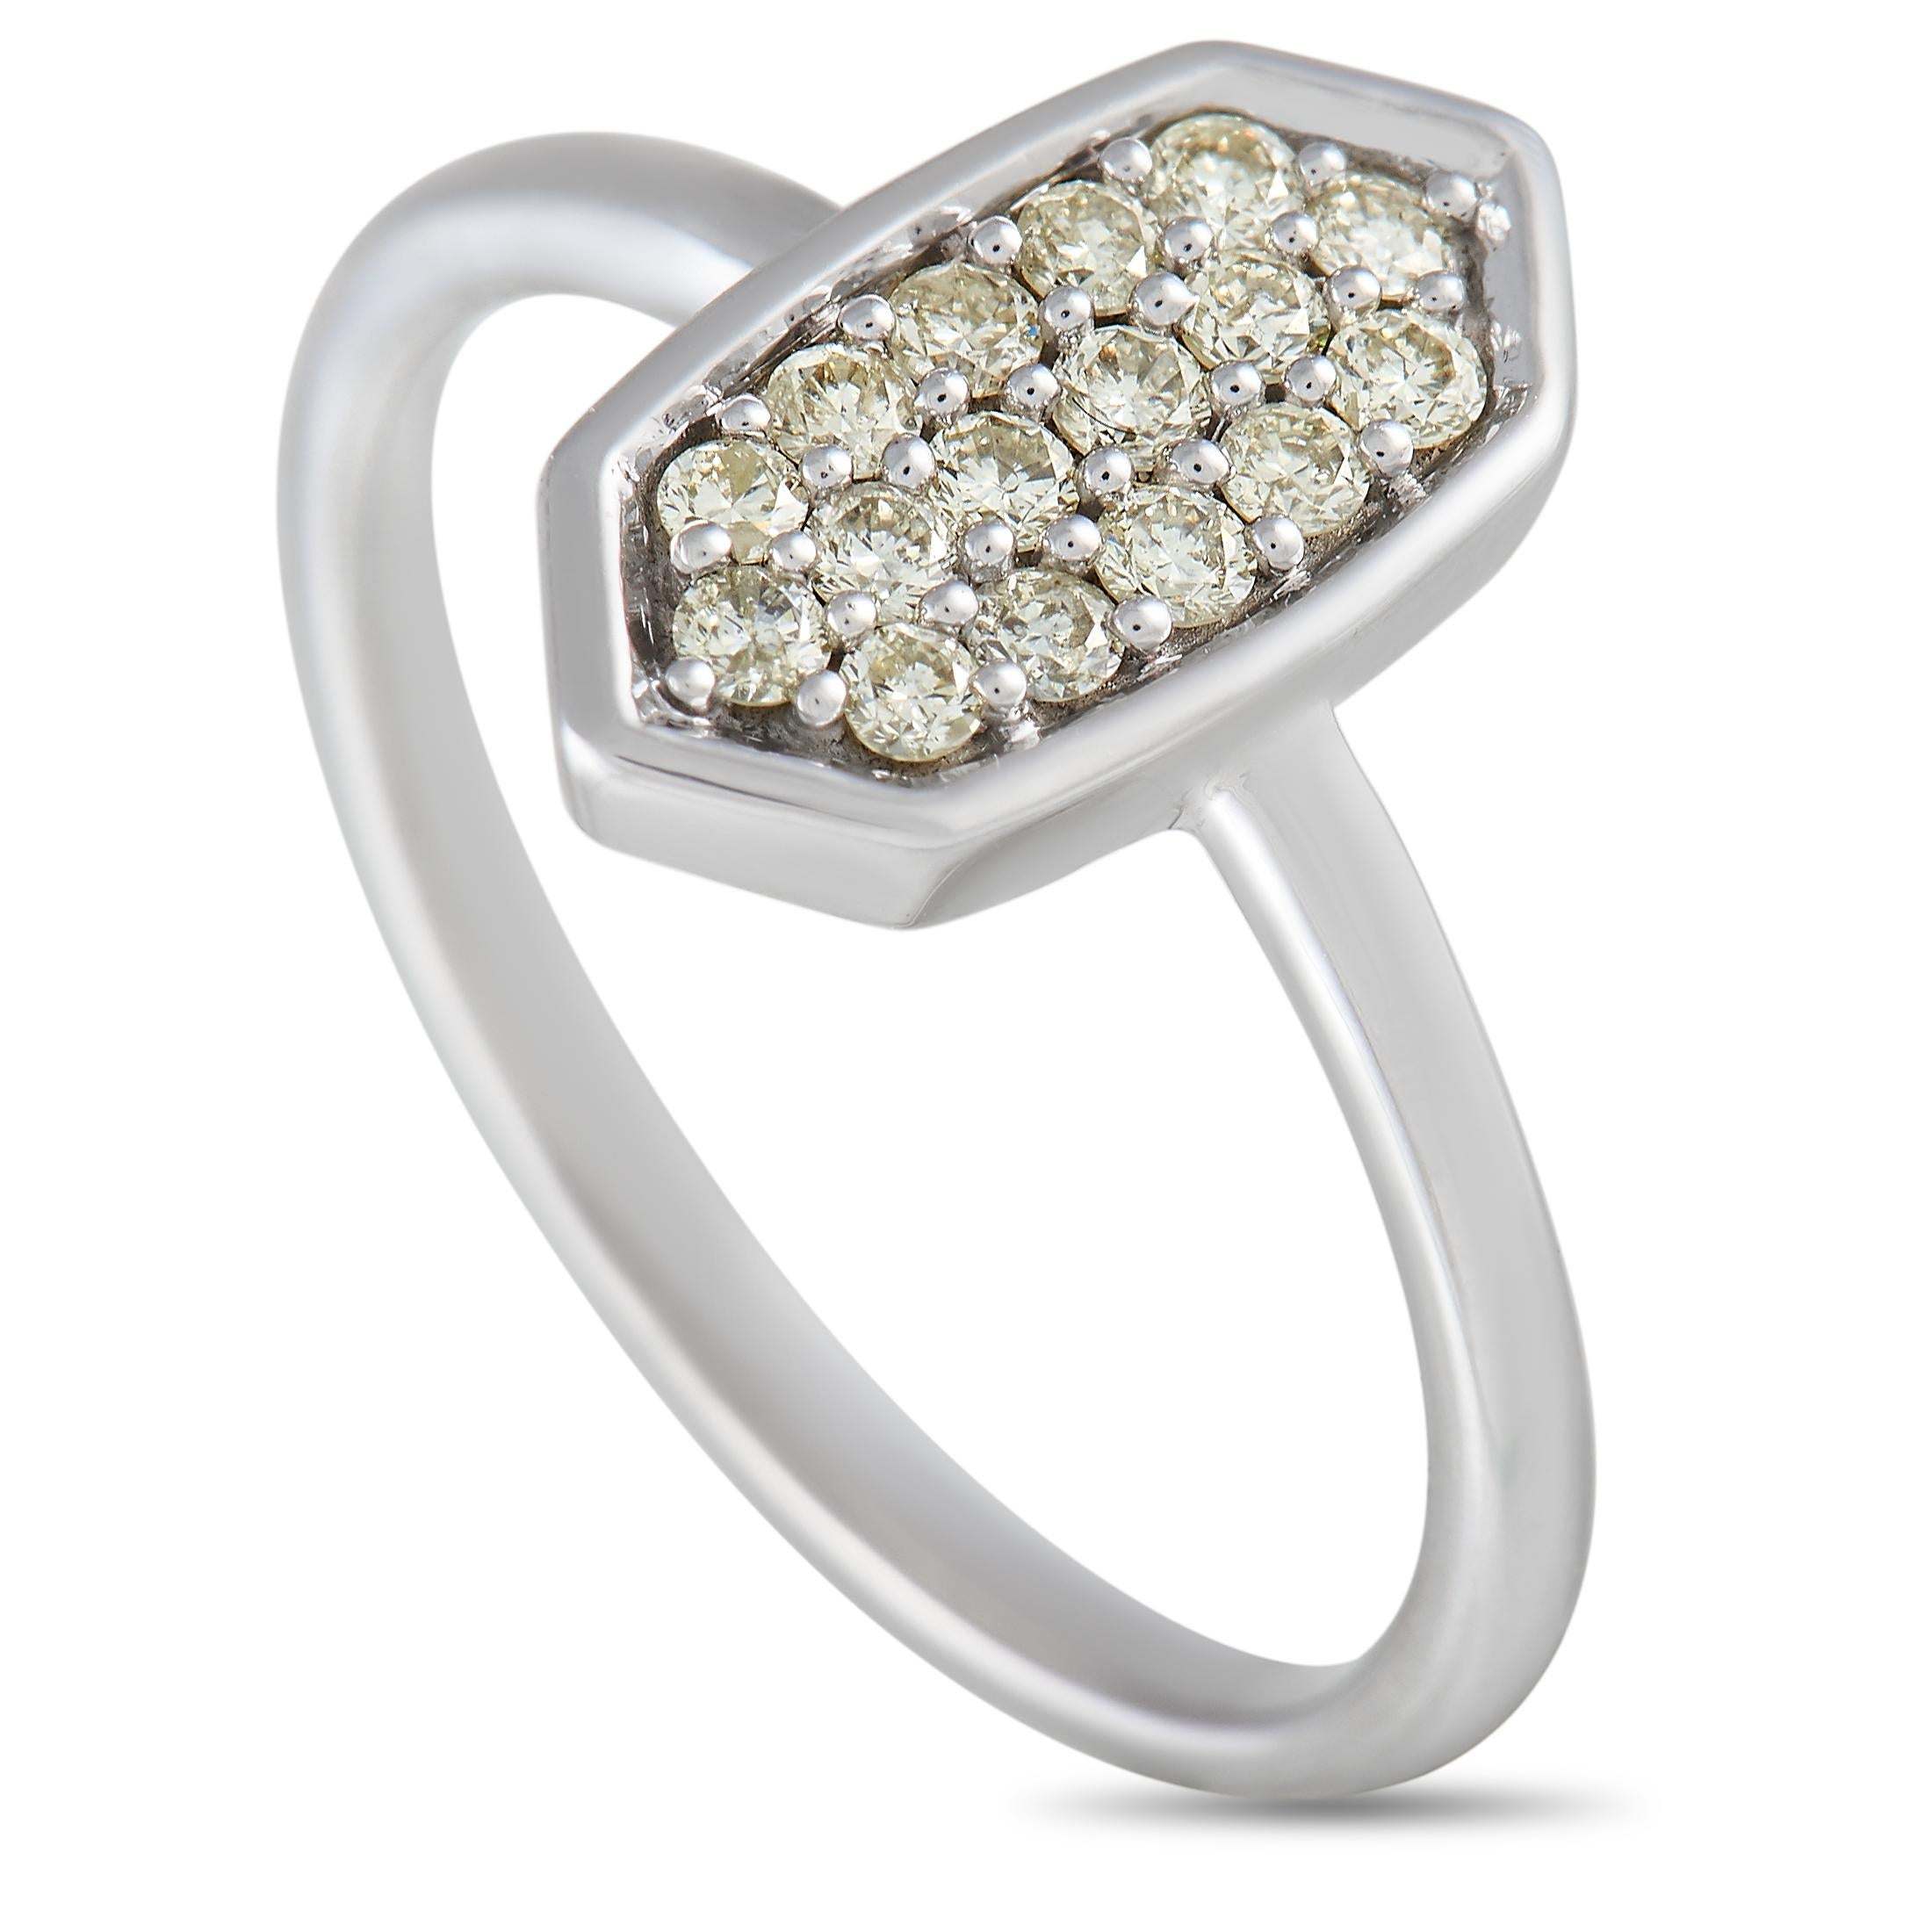 Sleek and modern in design, there’s something special about this scintillating luxury ring. At the center of the 1mm wide band, you’ll find a striking geometric motif that elegantly displays inset diamonds totaling 0.31 carats. This piece is crafted